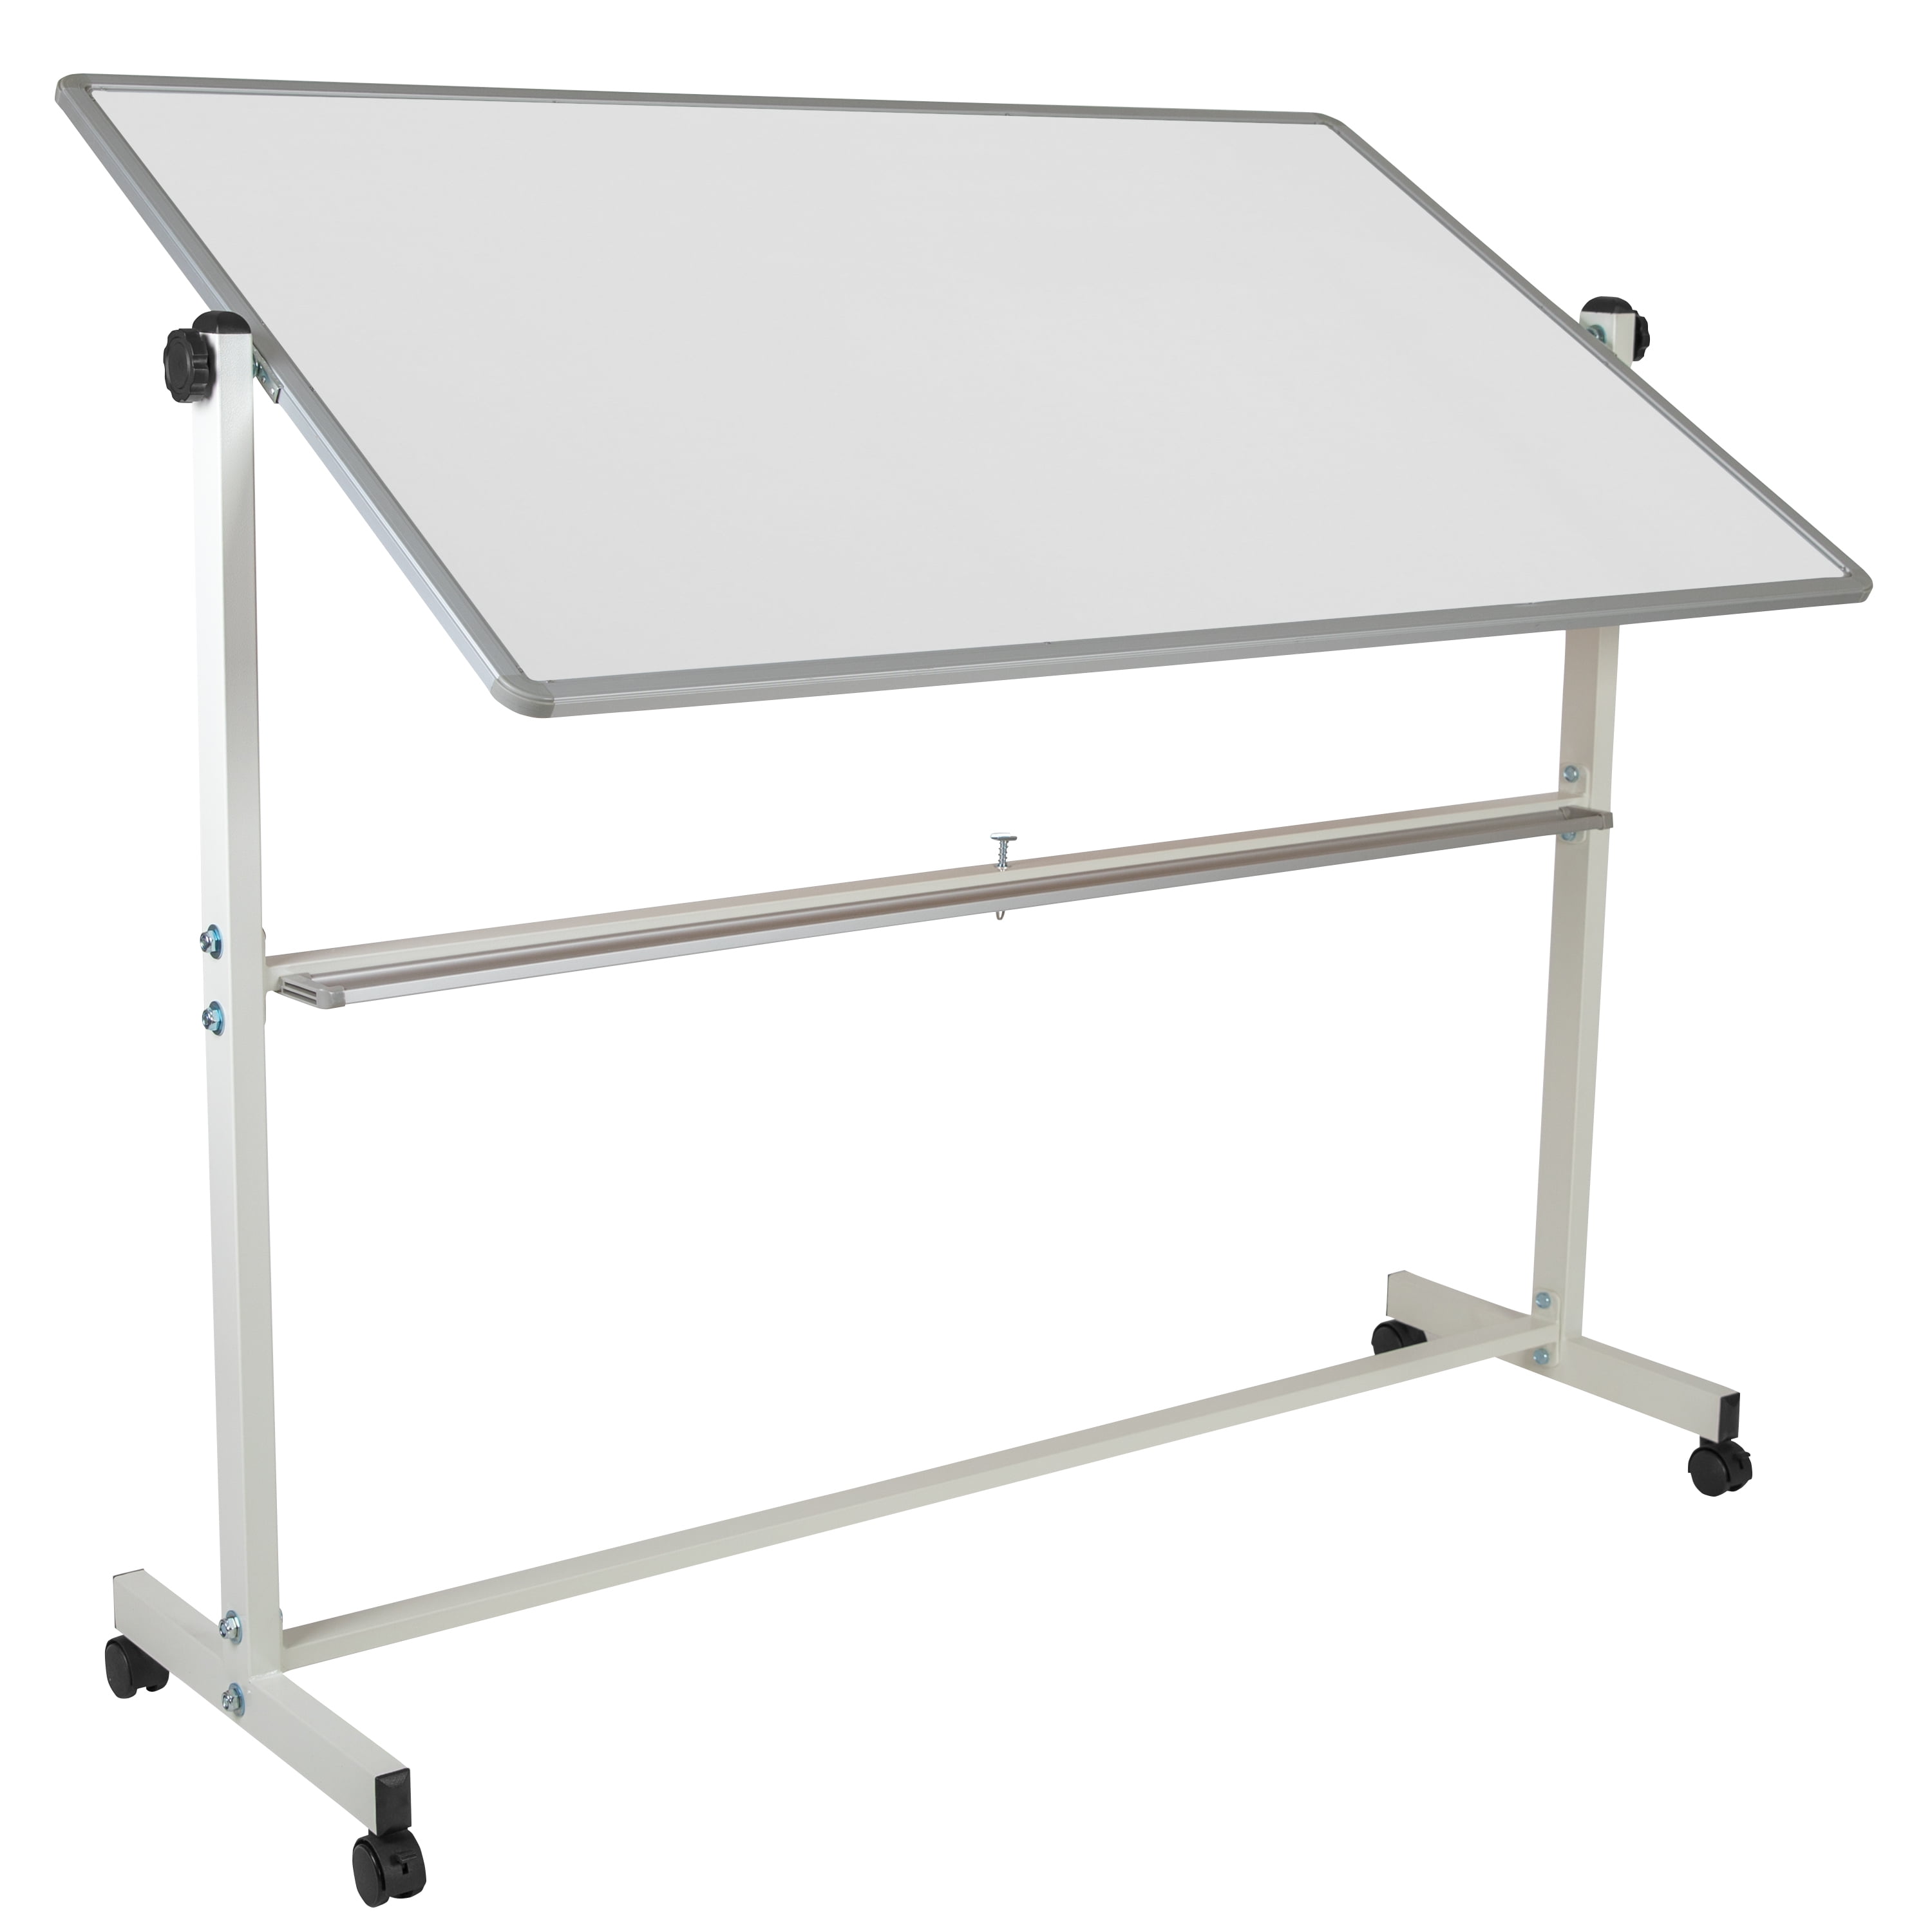 H-E-B Dual Sided Poster Board - White